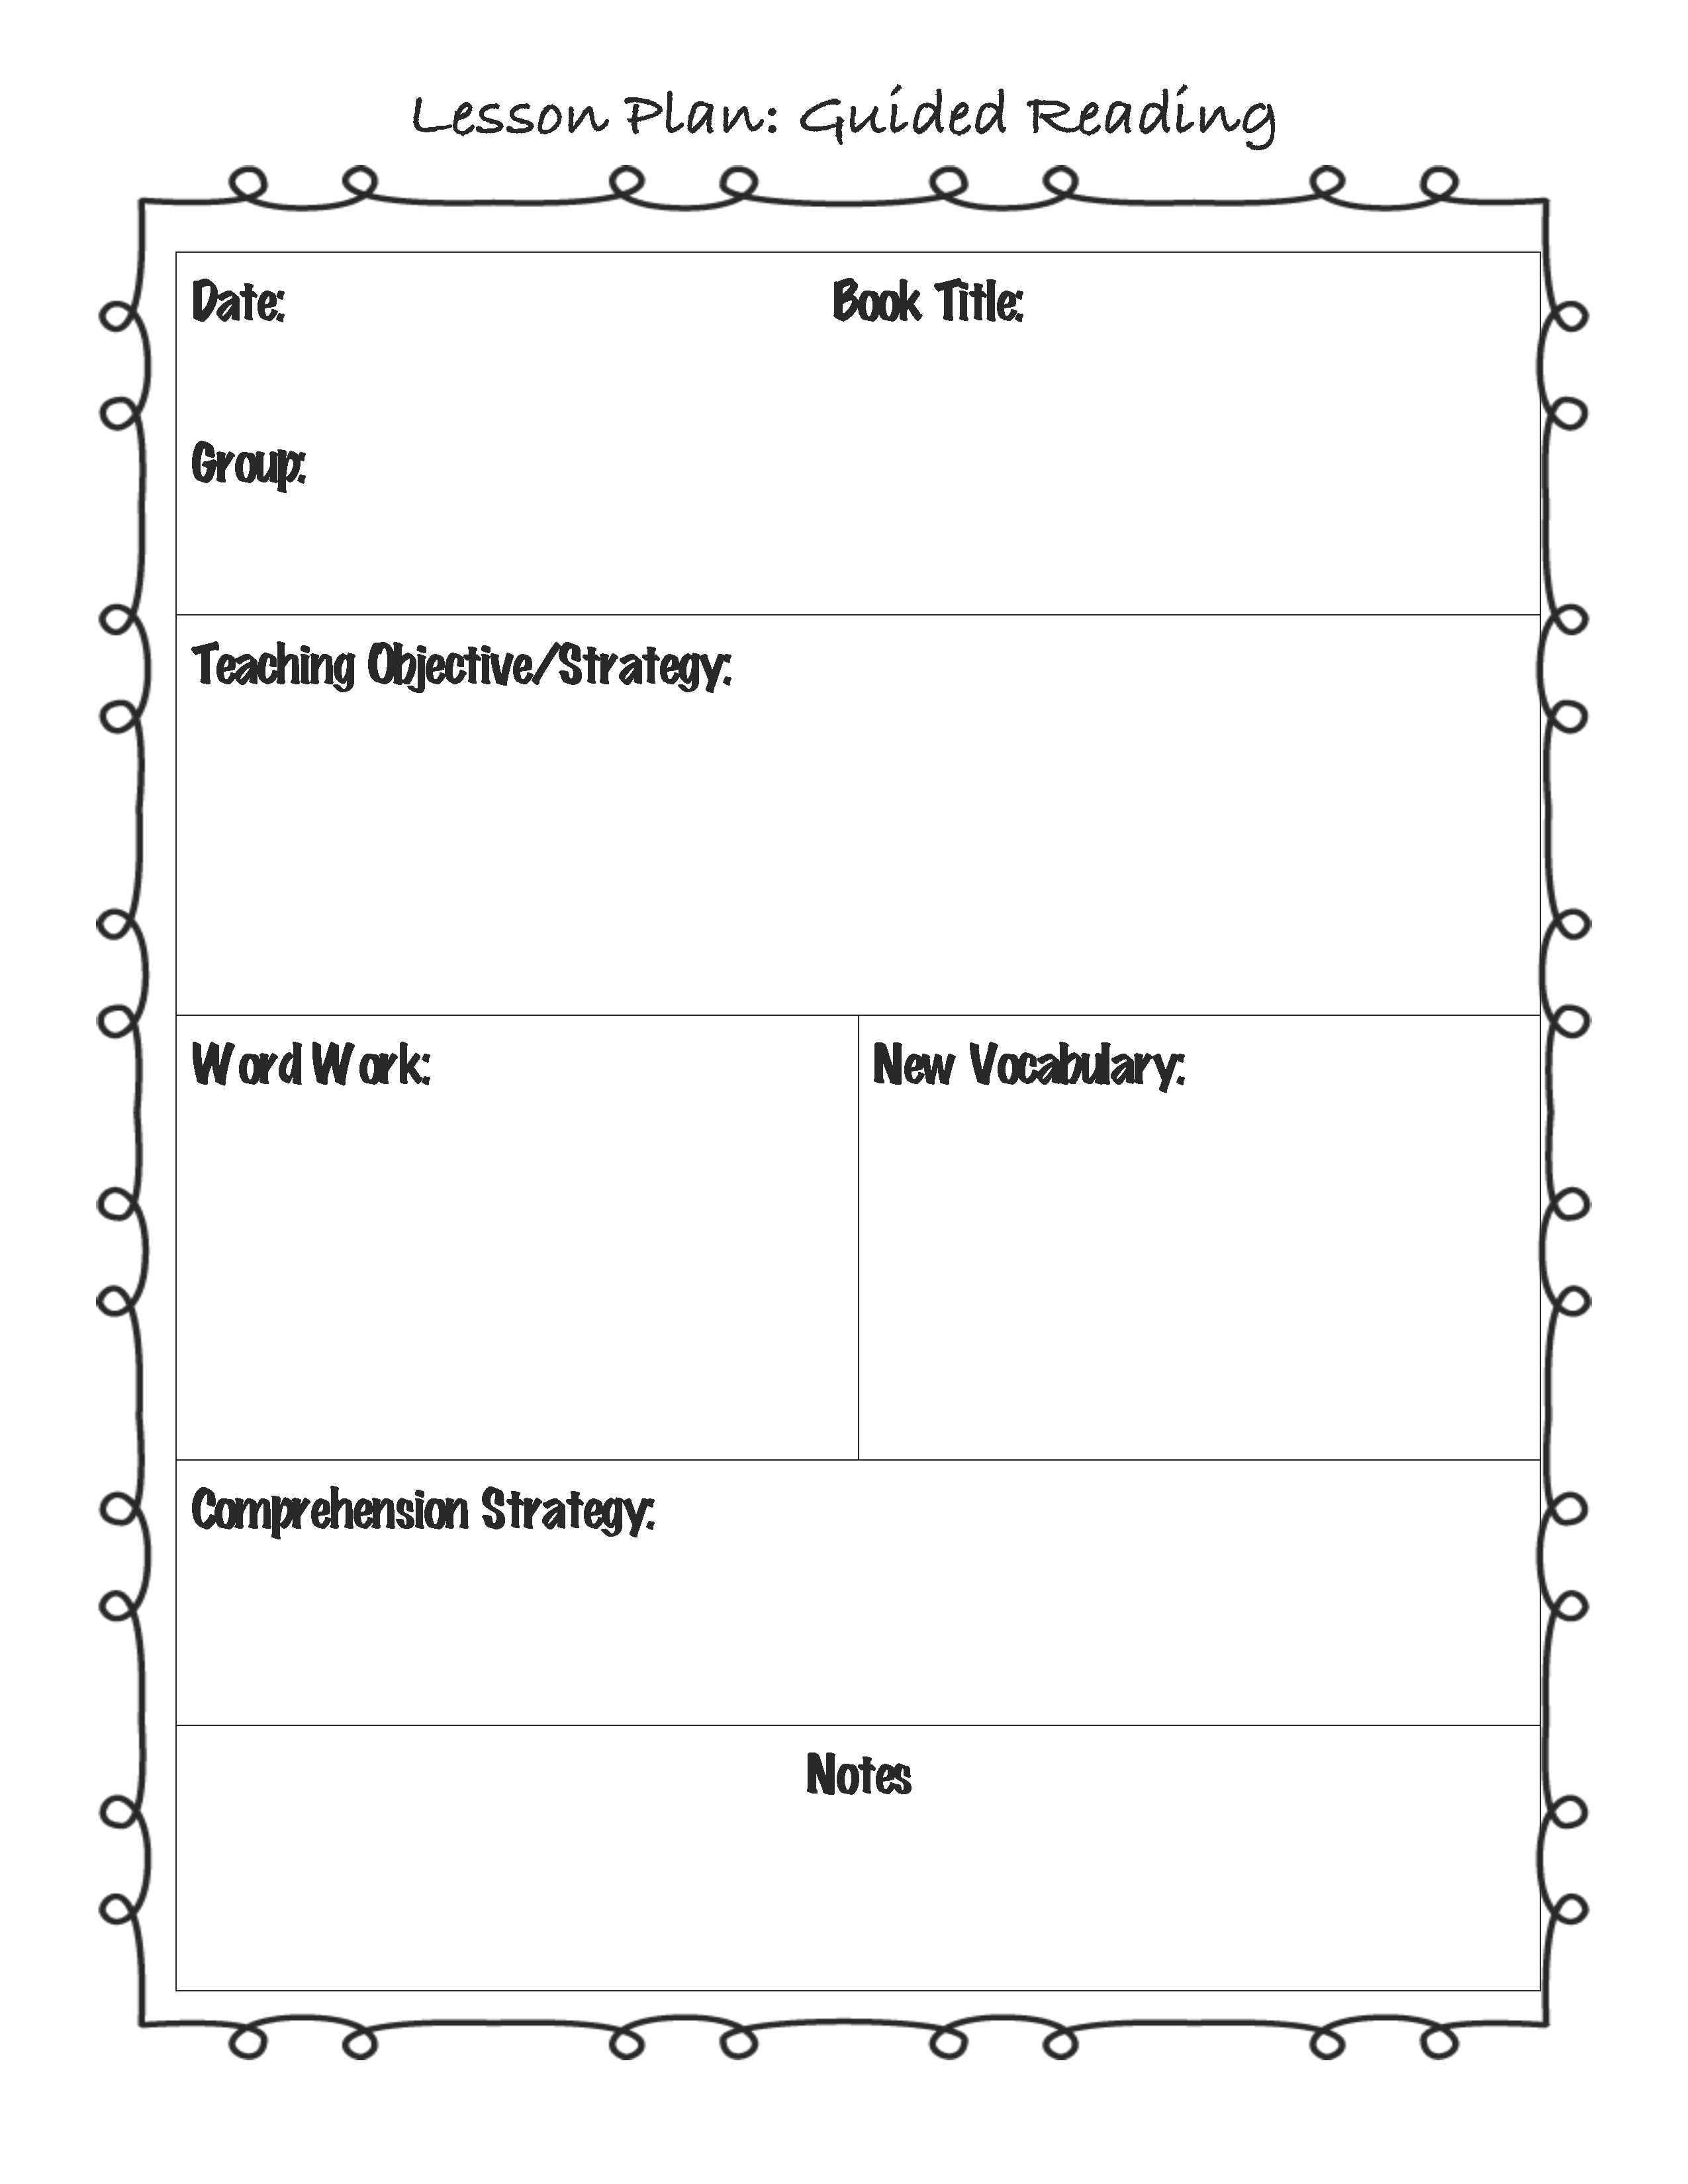 Free Printable Guided Reading Lesson Plans